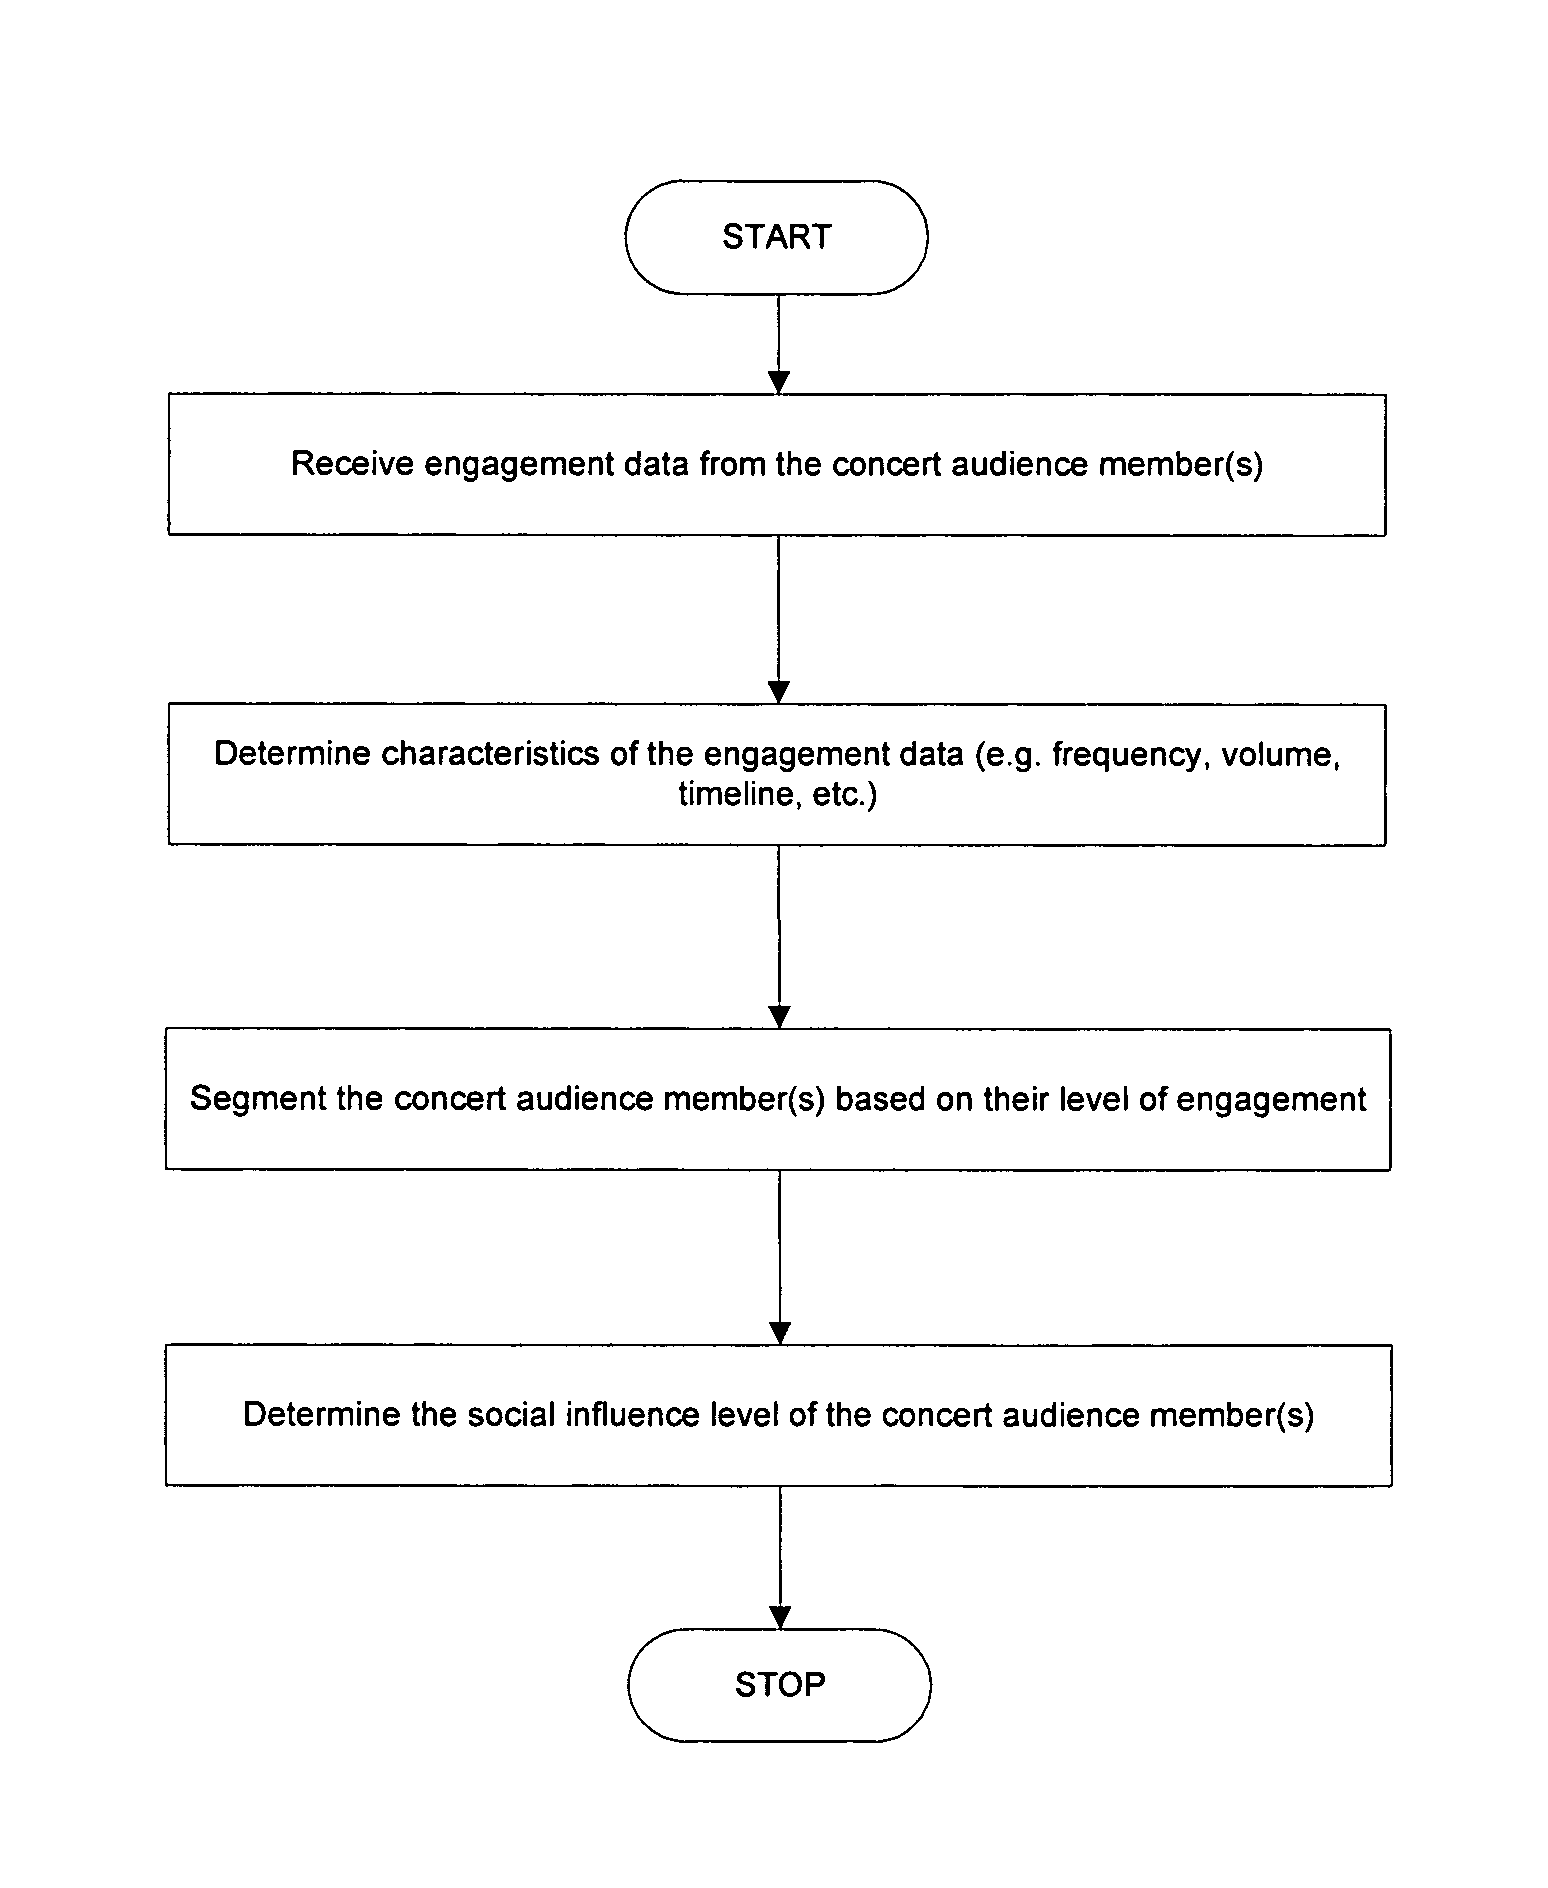 System and method for determining audience characteristics of a music concert based on mobile phone tracking and mobile data transmissions